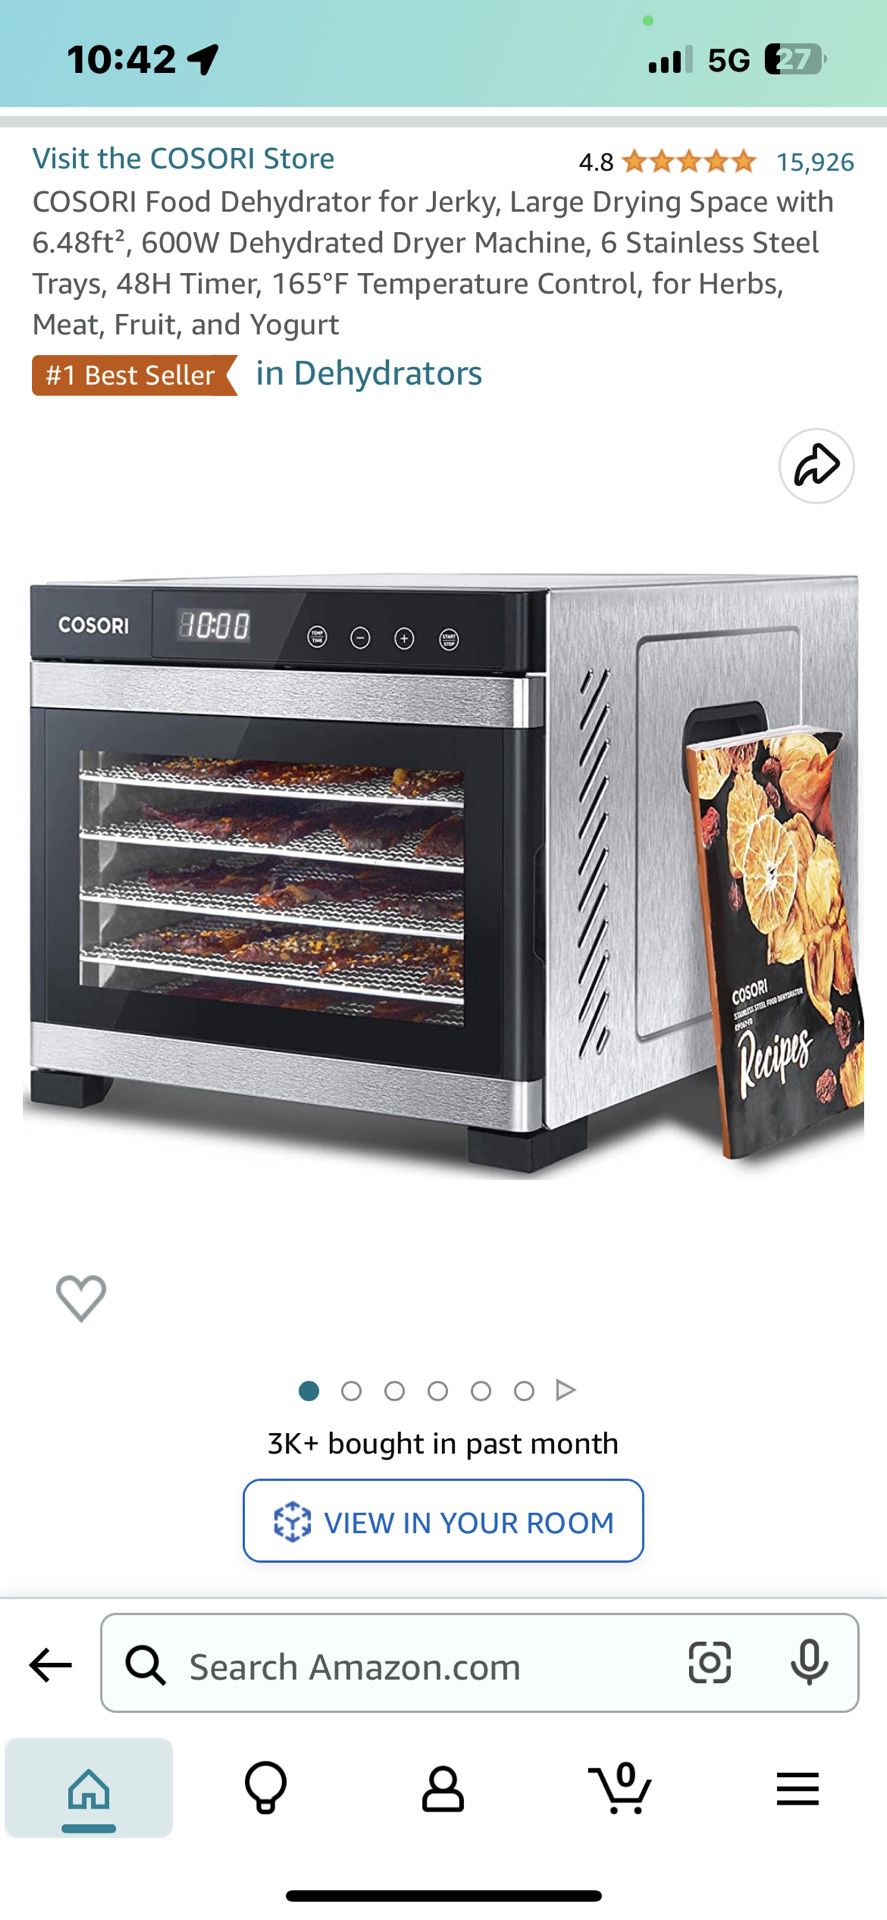  COSORI Food Dehydrator for Jerky, Large Drying Space